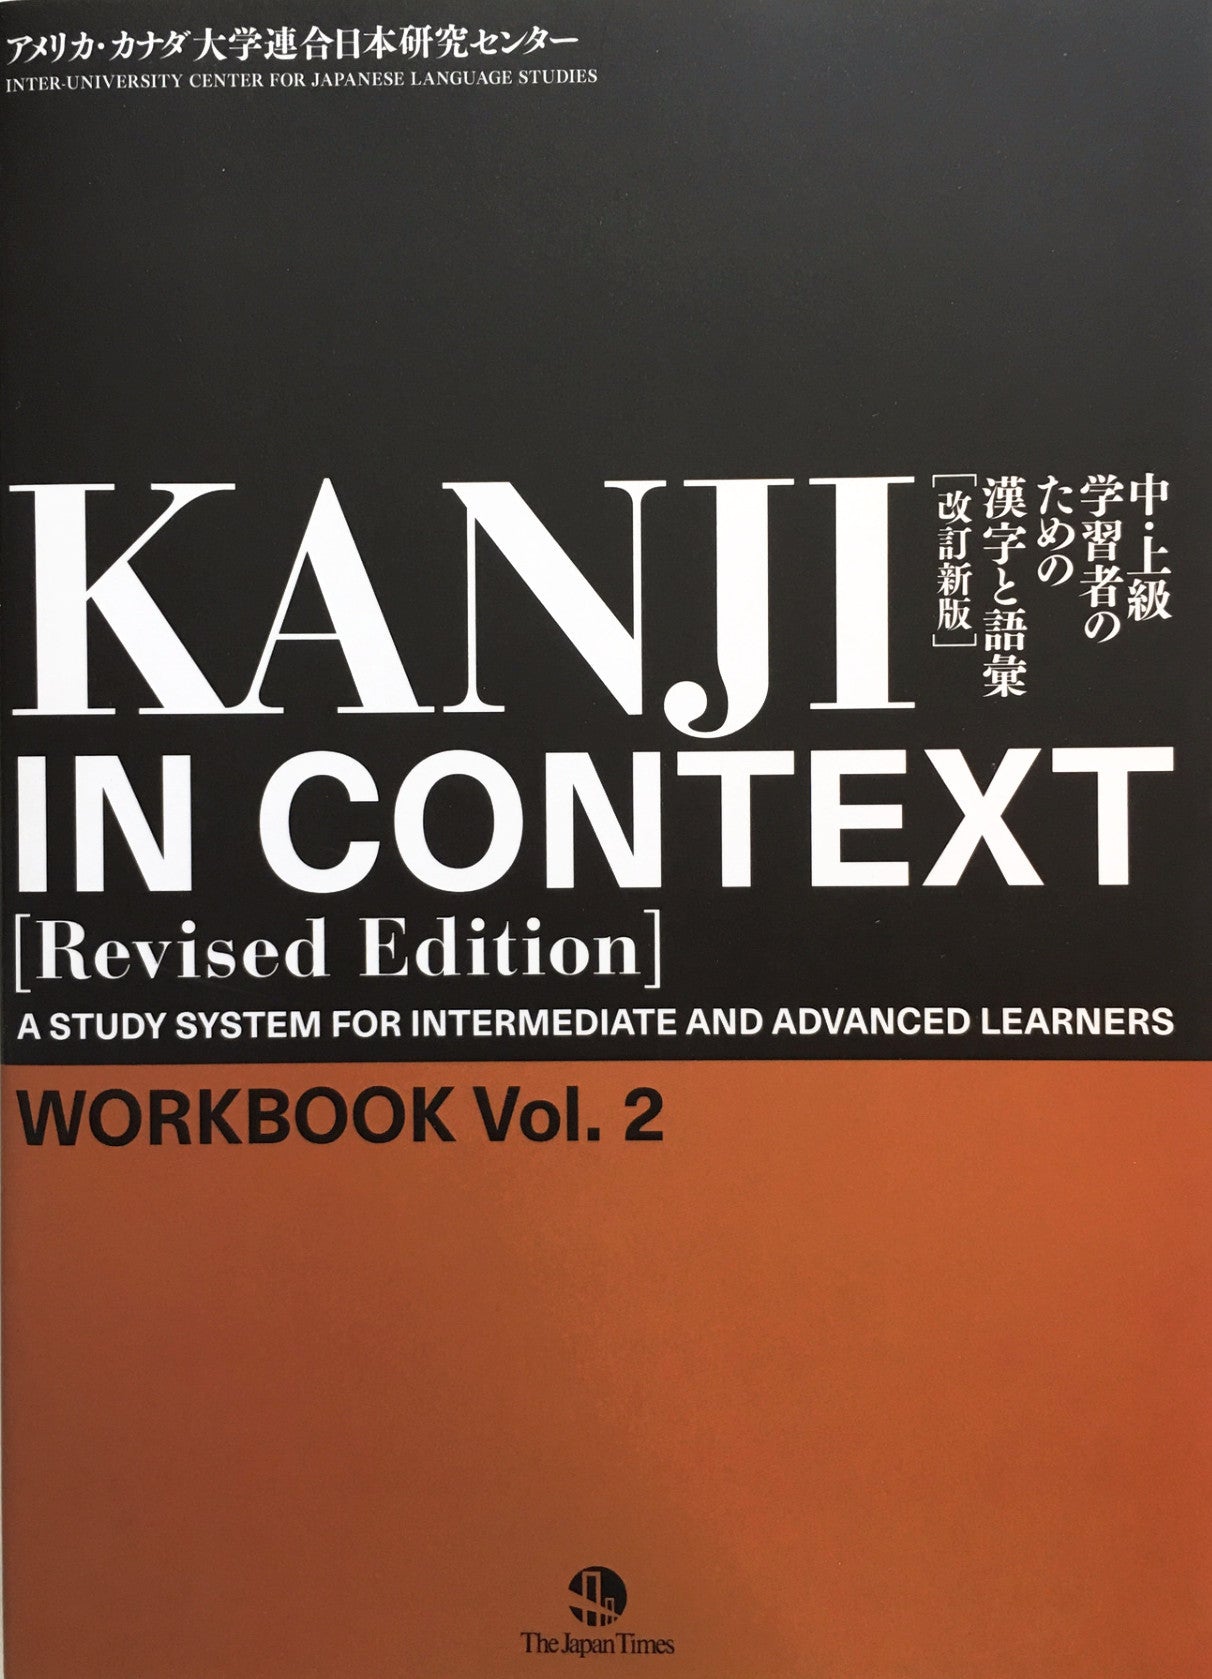 Kanji in Context Workbook 2 (Revised Edition) - The Japan Shop